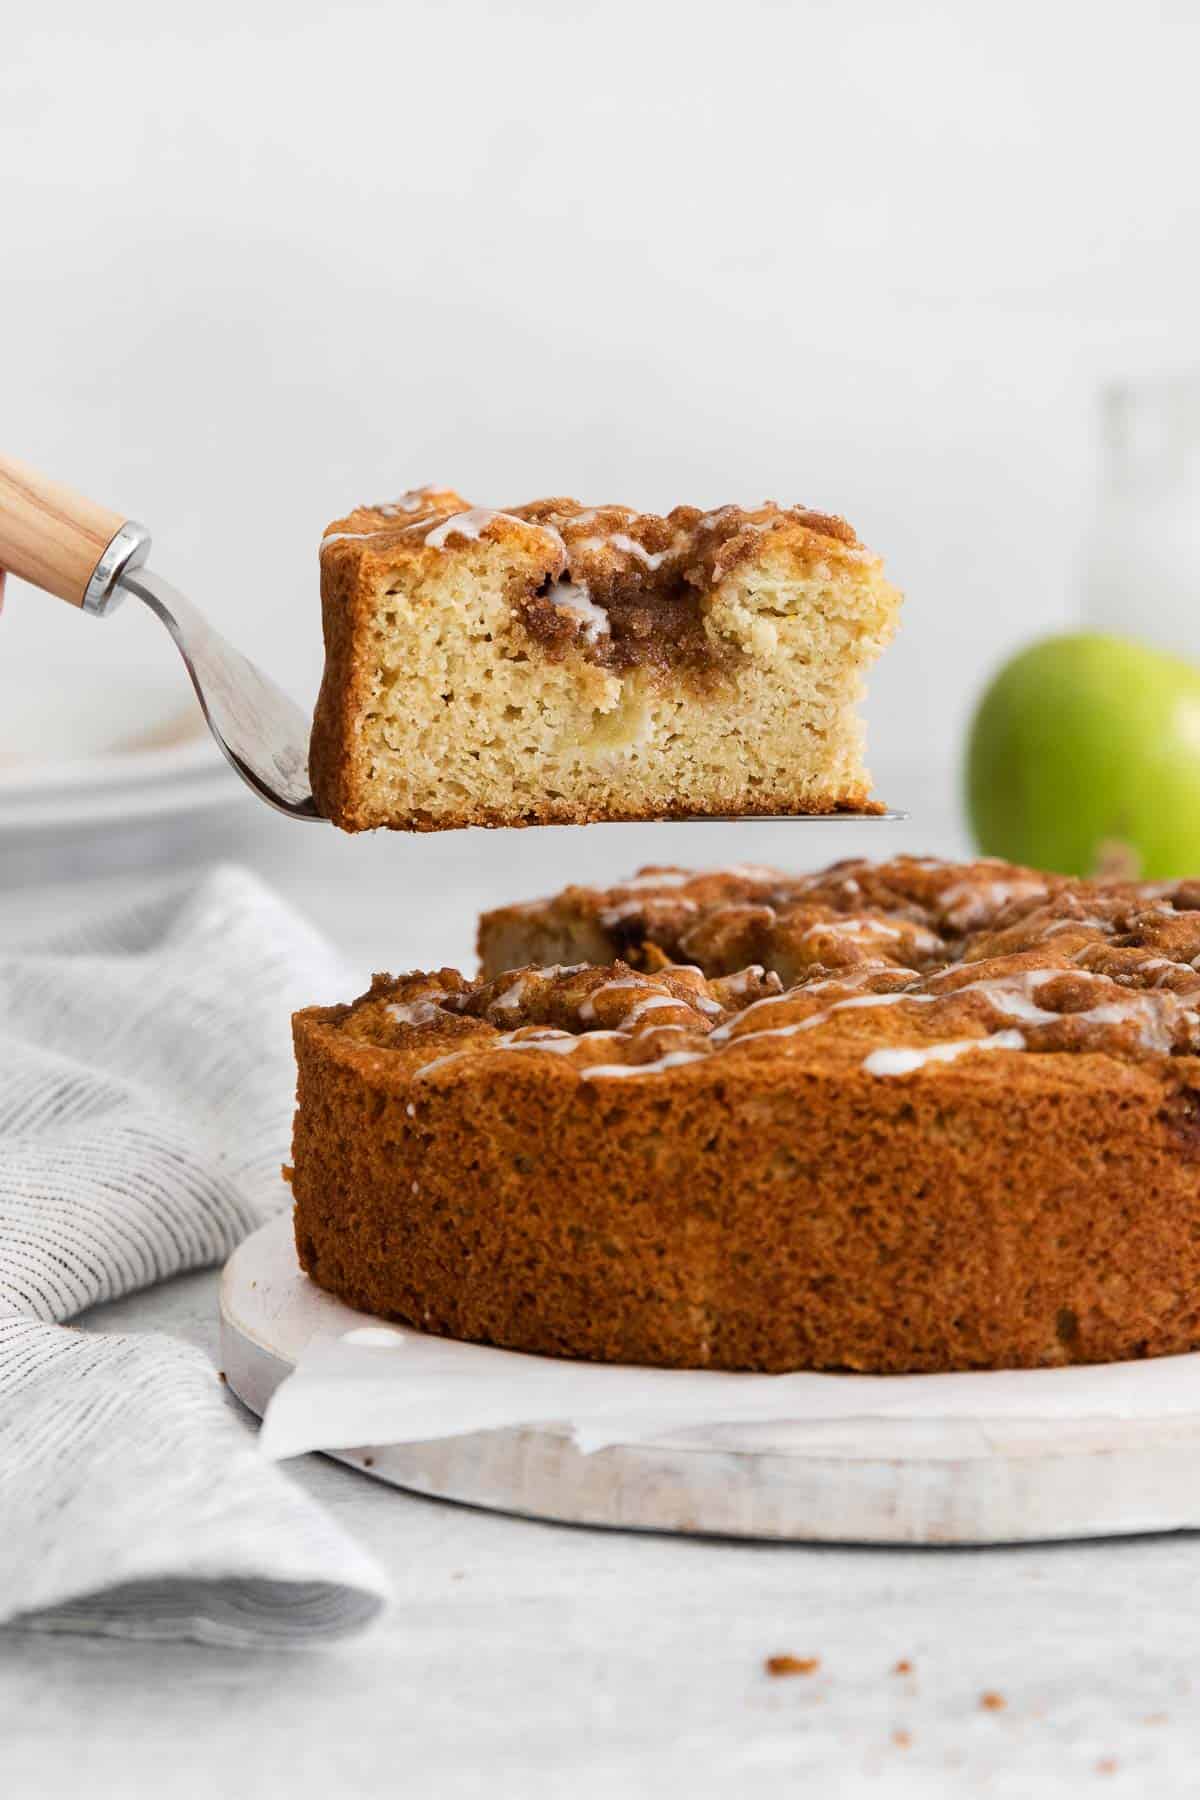 A spatula taking a slice of cake out of the apple cake